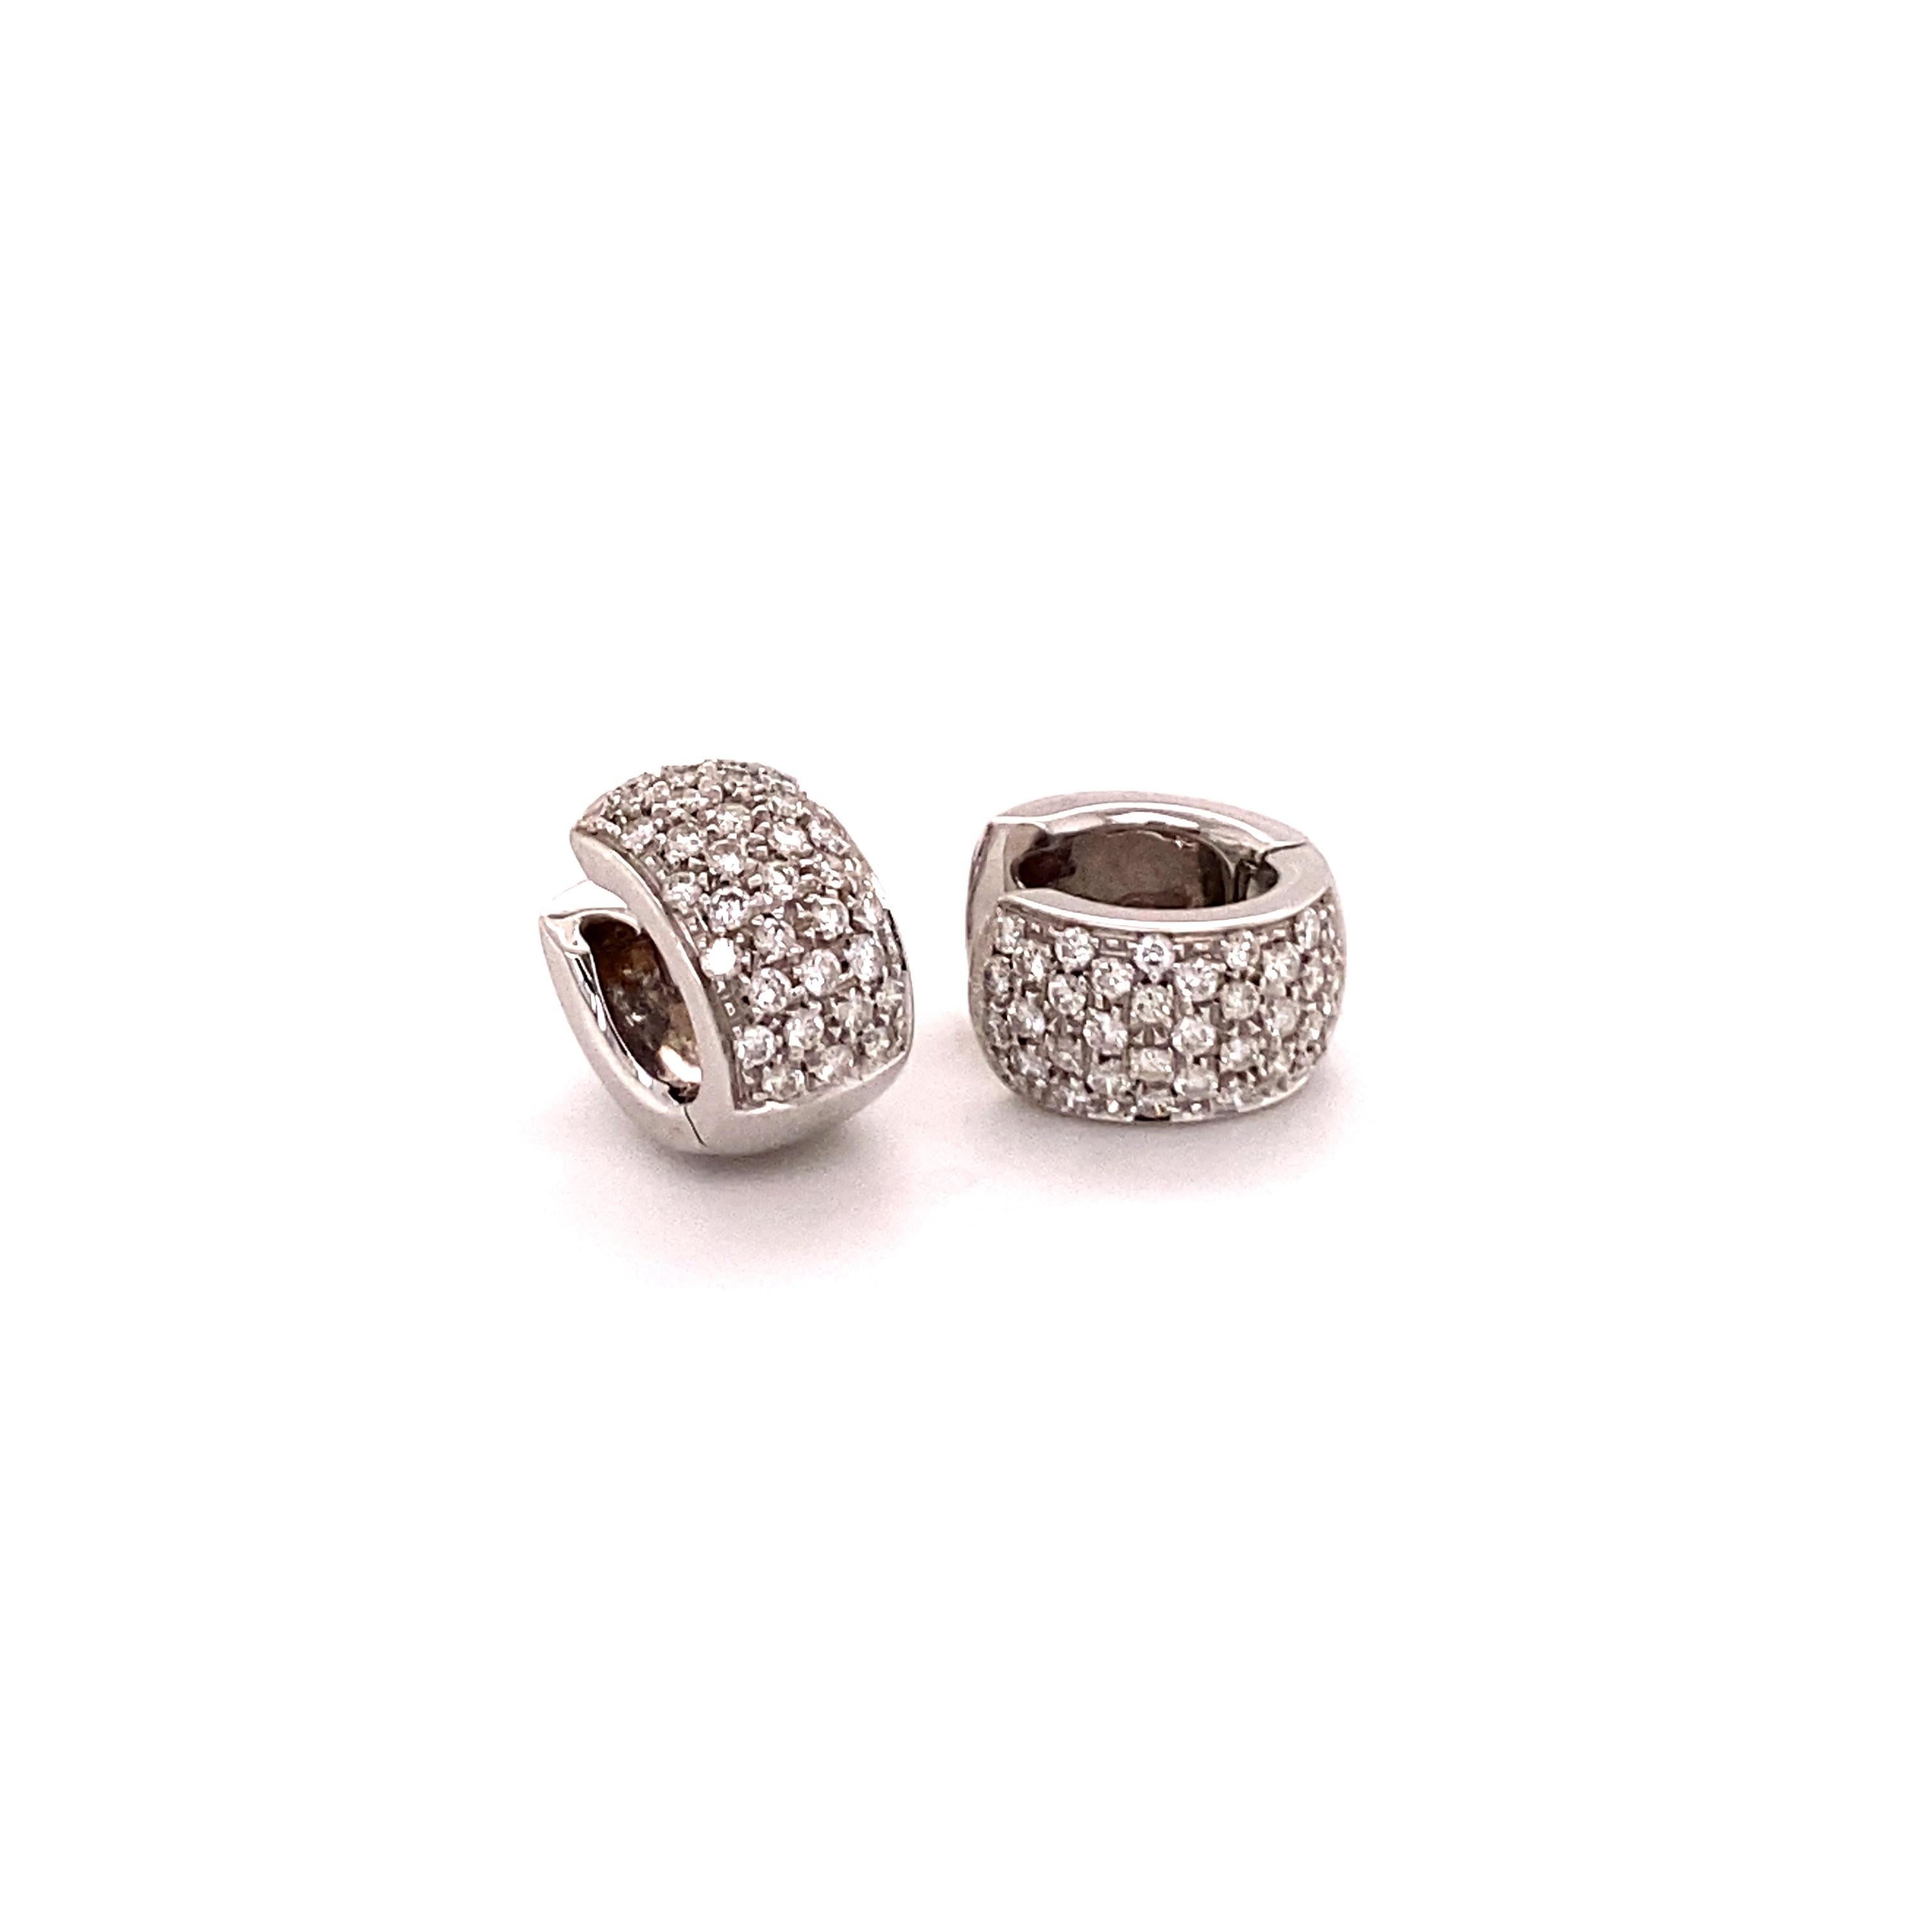 Elegant and classic diamond clip-on earrings crafted in 18K white gold. Two pavé set beds with a total of 70 brilliant-cut diamonds together weighing 0.84 carats . The diamonds are of G/H colour and si clarity.

A must have in every modern jewellery